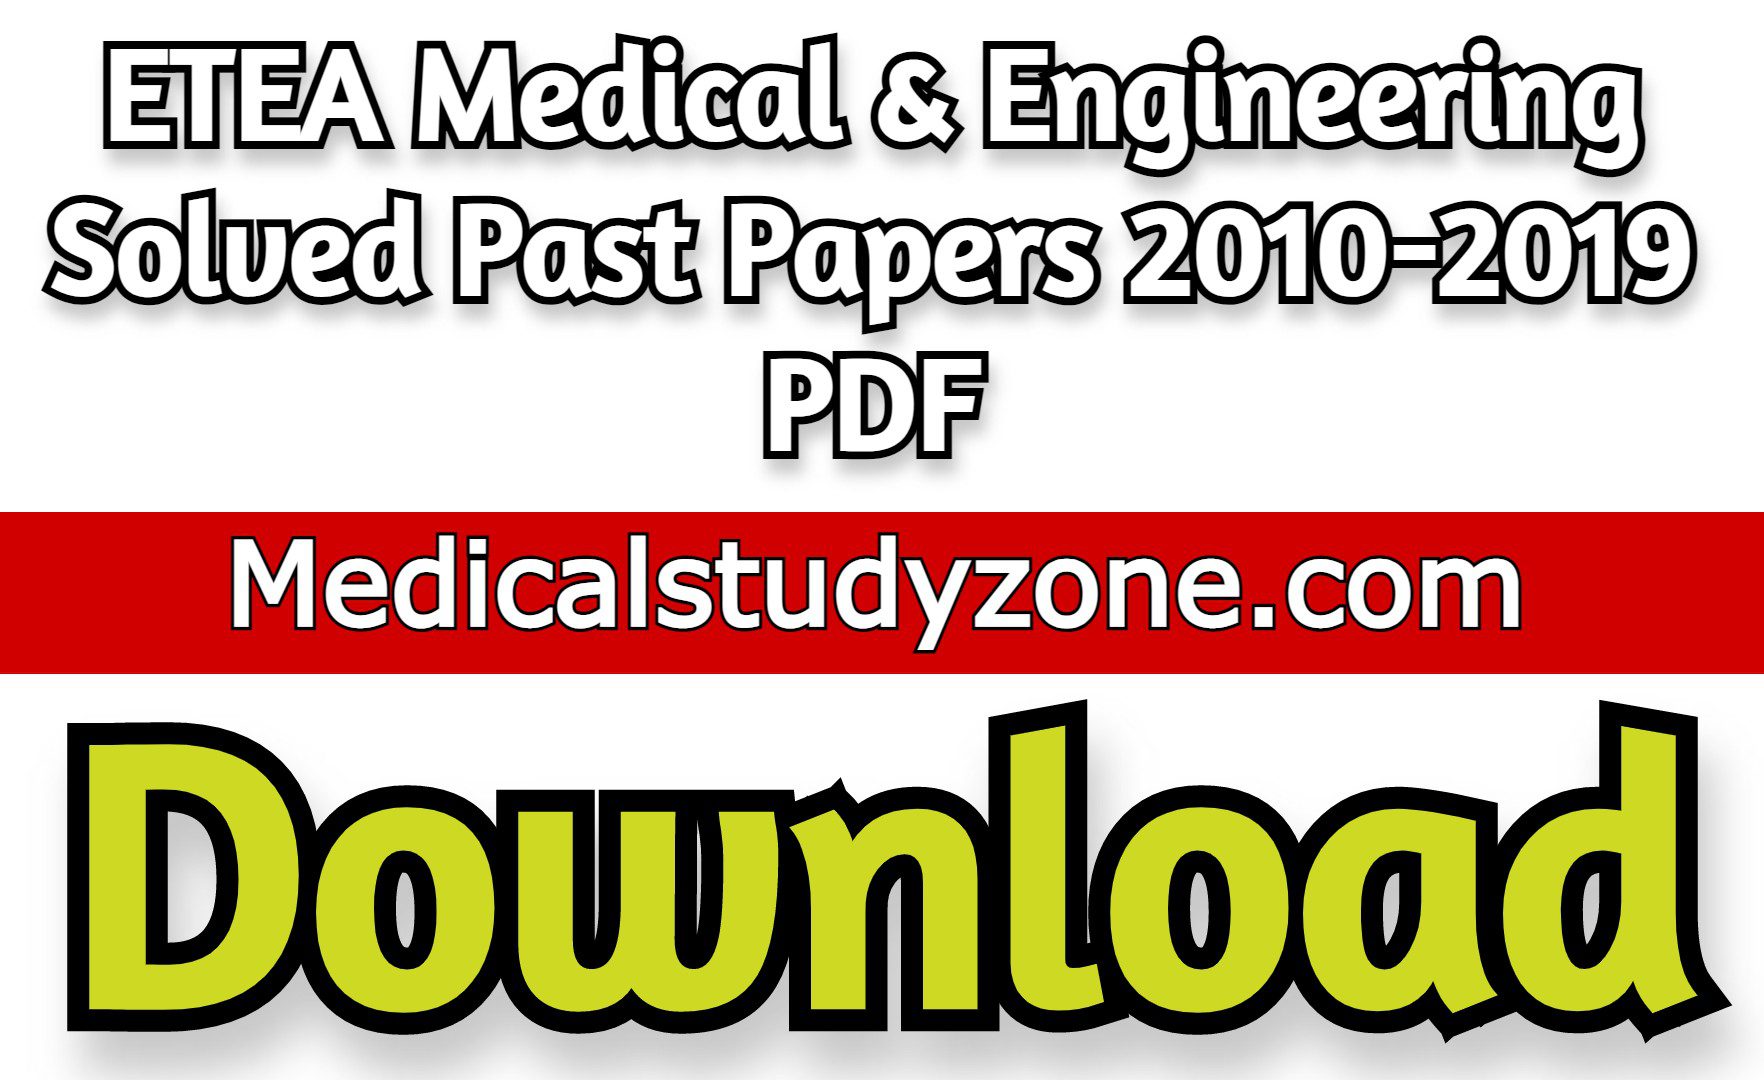 ETEA Medical & Engineering Solved Past Papers 2010-2019 PDF Free Download